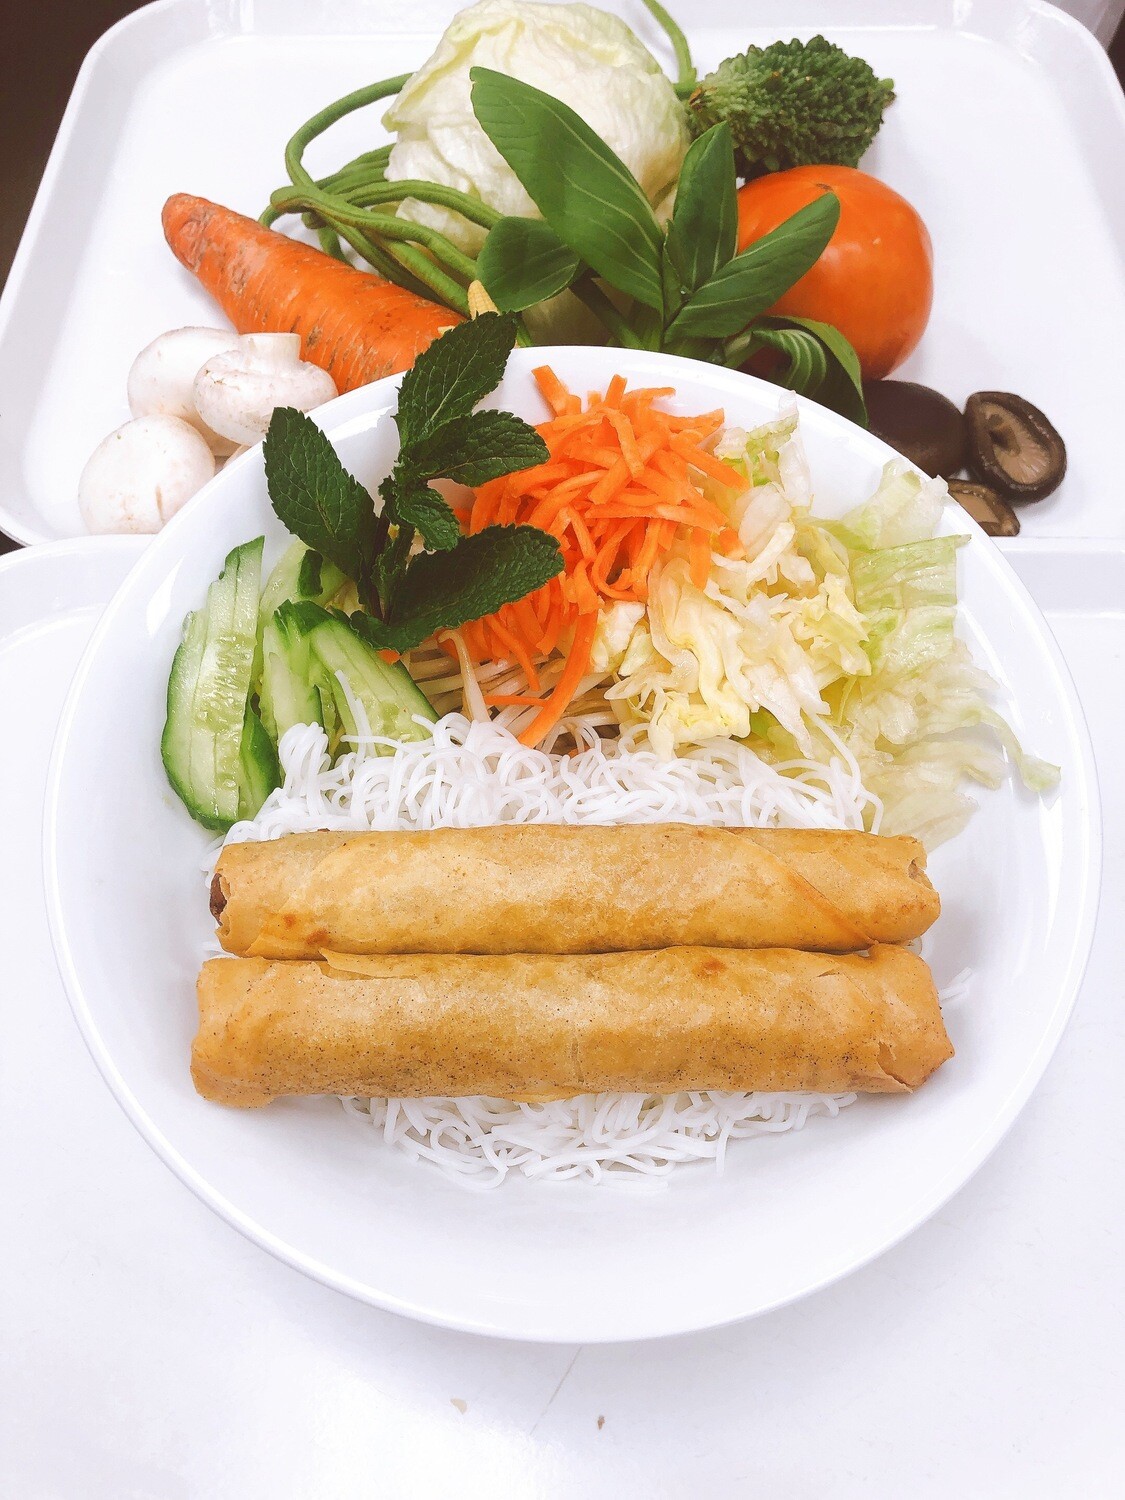 614- Vermicelli with Vegetarian Spring Rolls (2 Rolls)